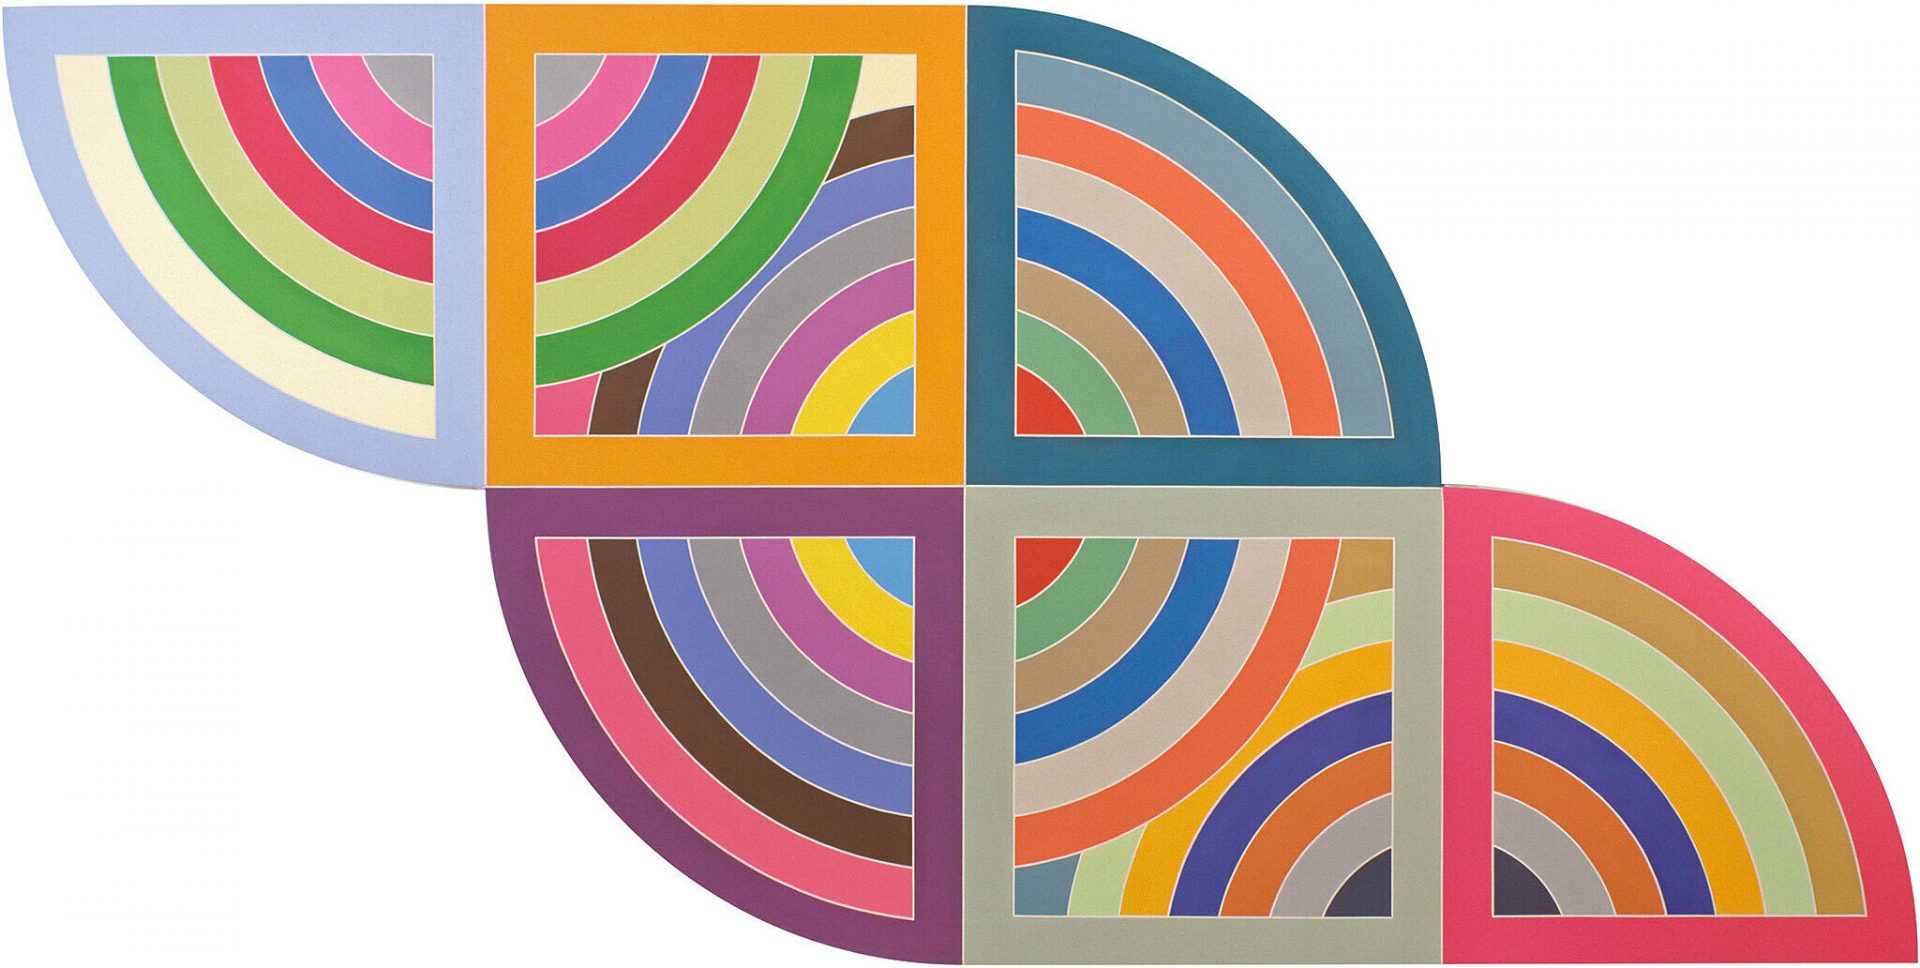 “Harran II” is a vibrant, abstract painting by Frank Stella, featuring interlocking protractor-inspired shapes filled with eight radiant, concentric rainbow bands. The bright bands are rendered in an intense mix of psychedelic acrylic and fluorescent pigments. Despite the circular illusion, the shapes are defined by intersecting straight lines, creating a grid-like pattern beneath the sweeping arcs.